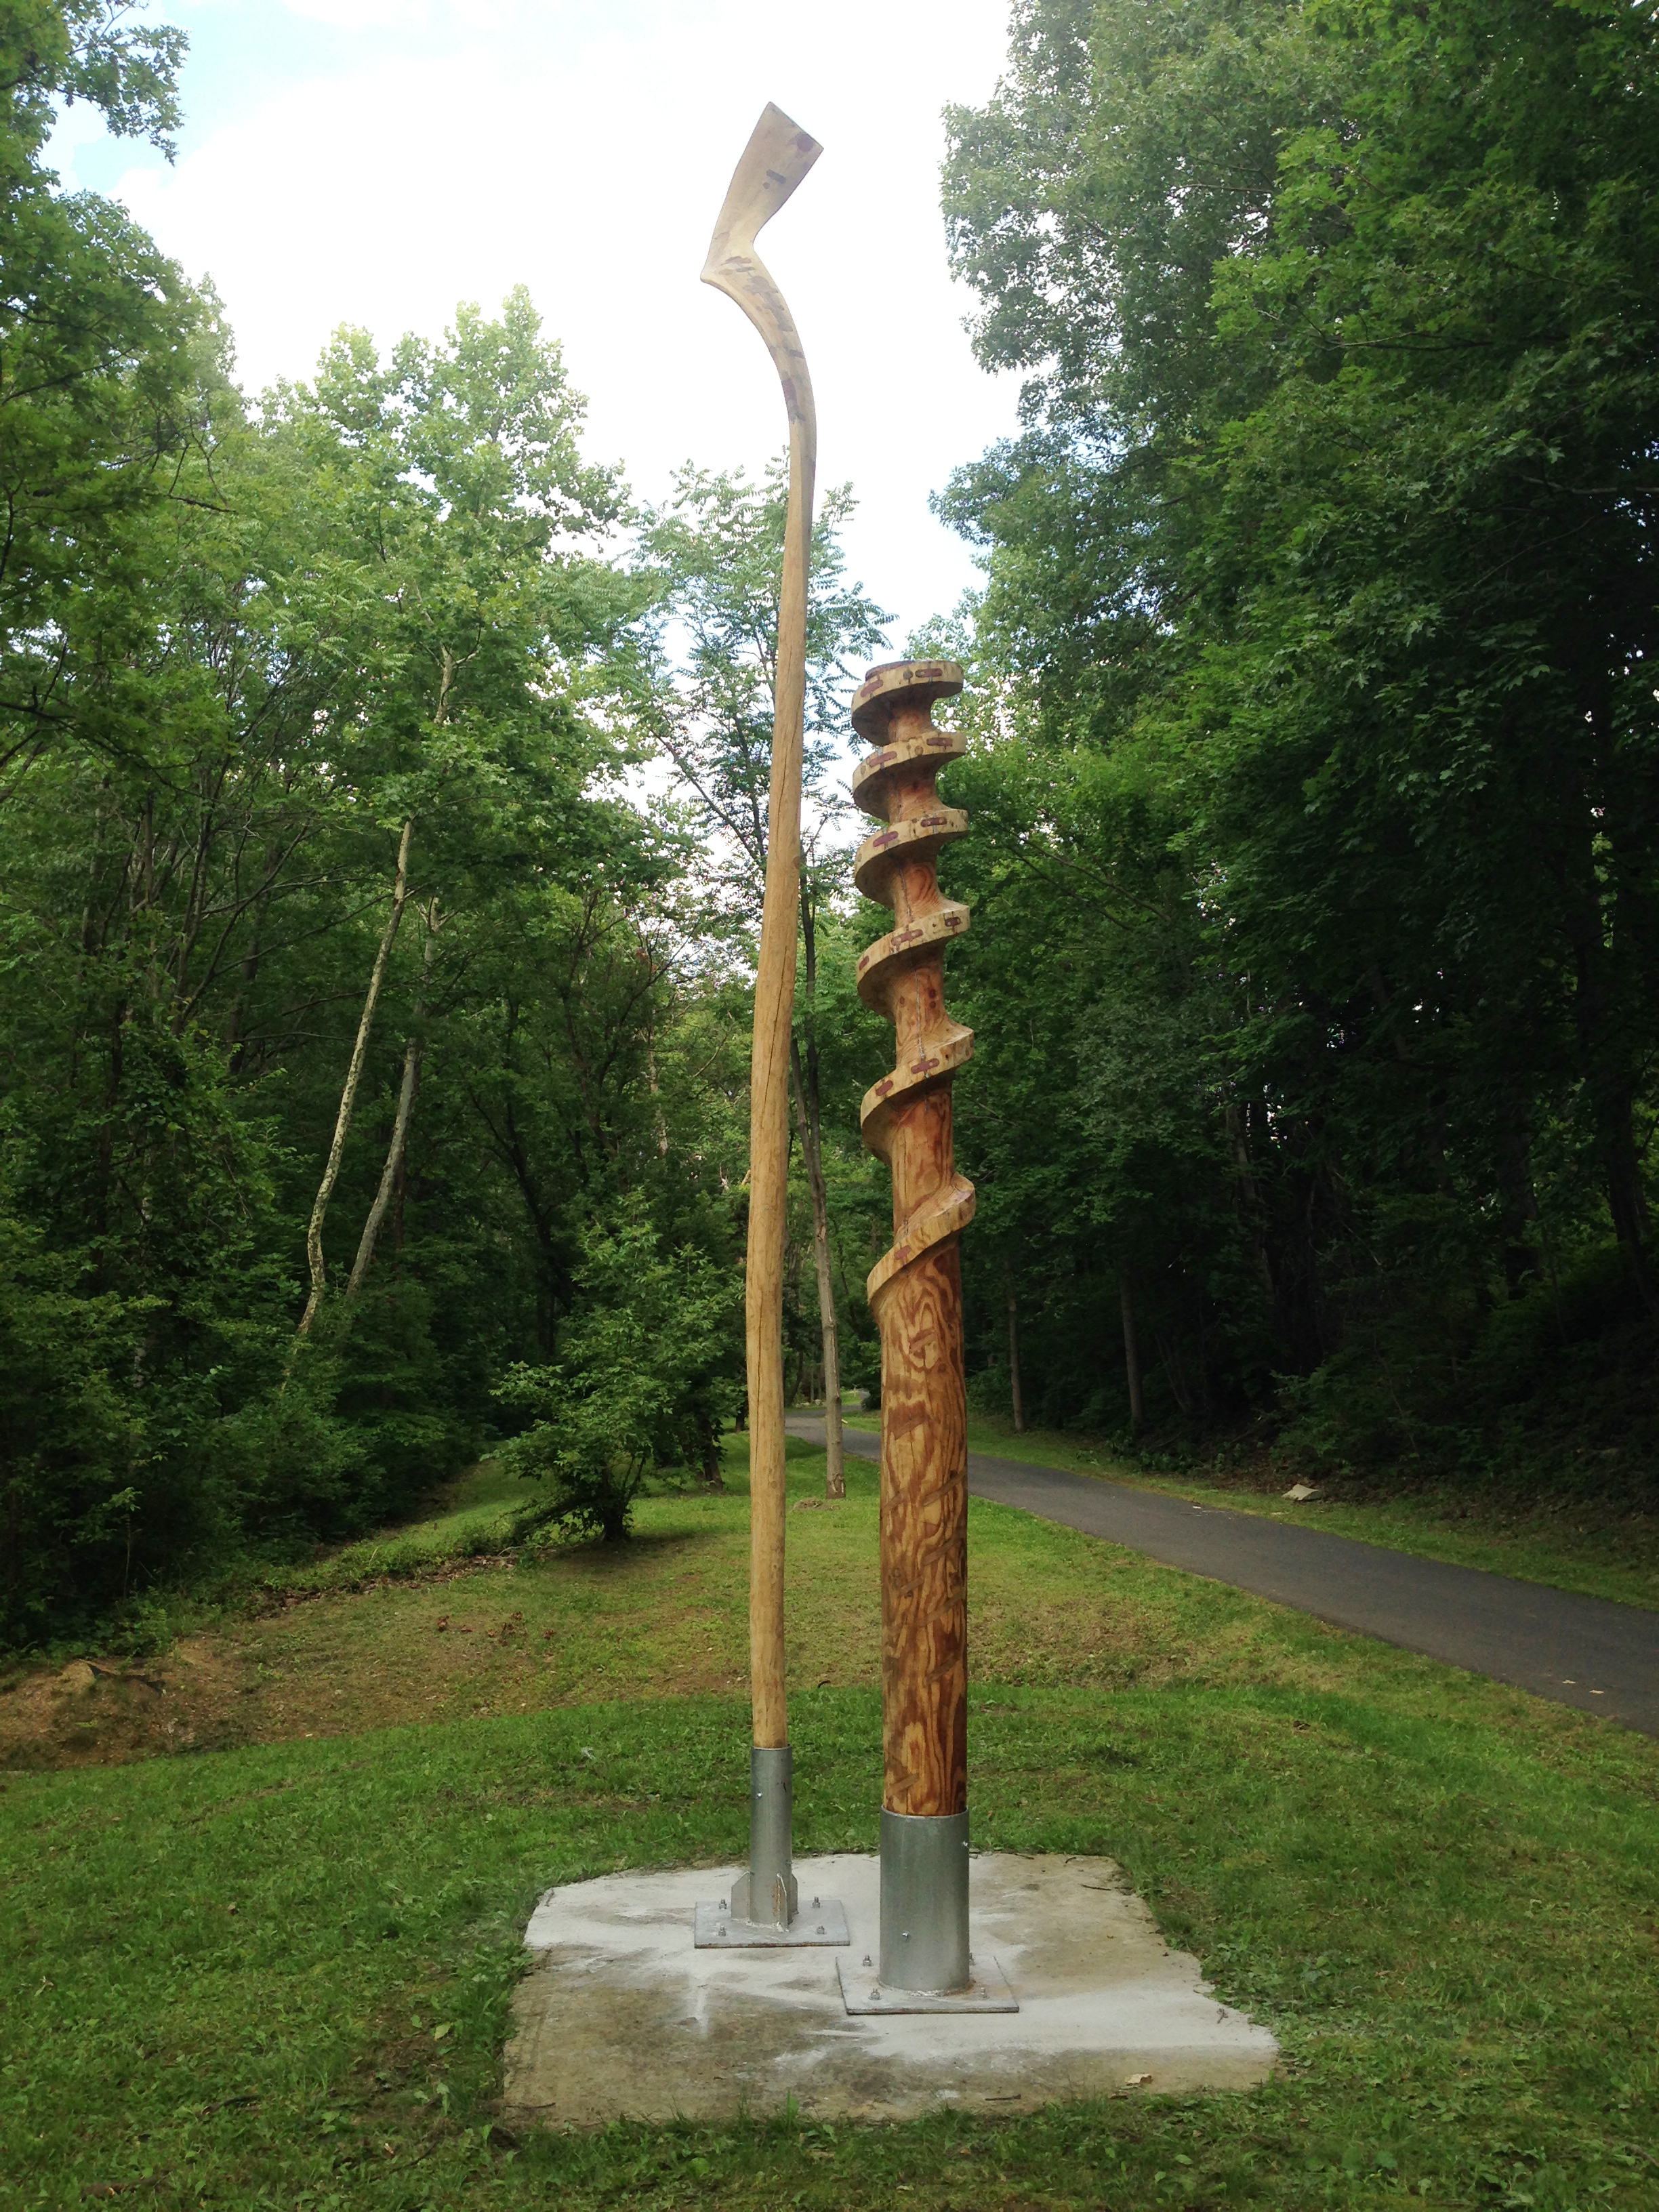 The metal sculpture Nobori, with two poles, on the Karl Stirner Arts Trail